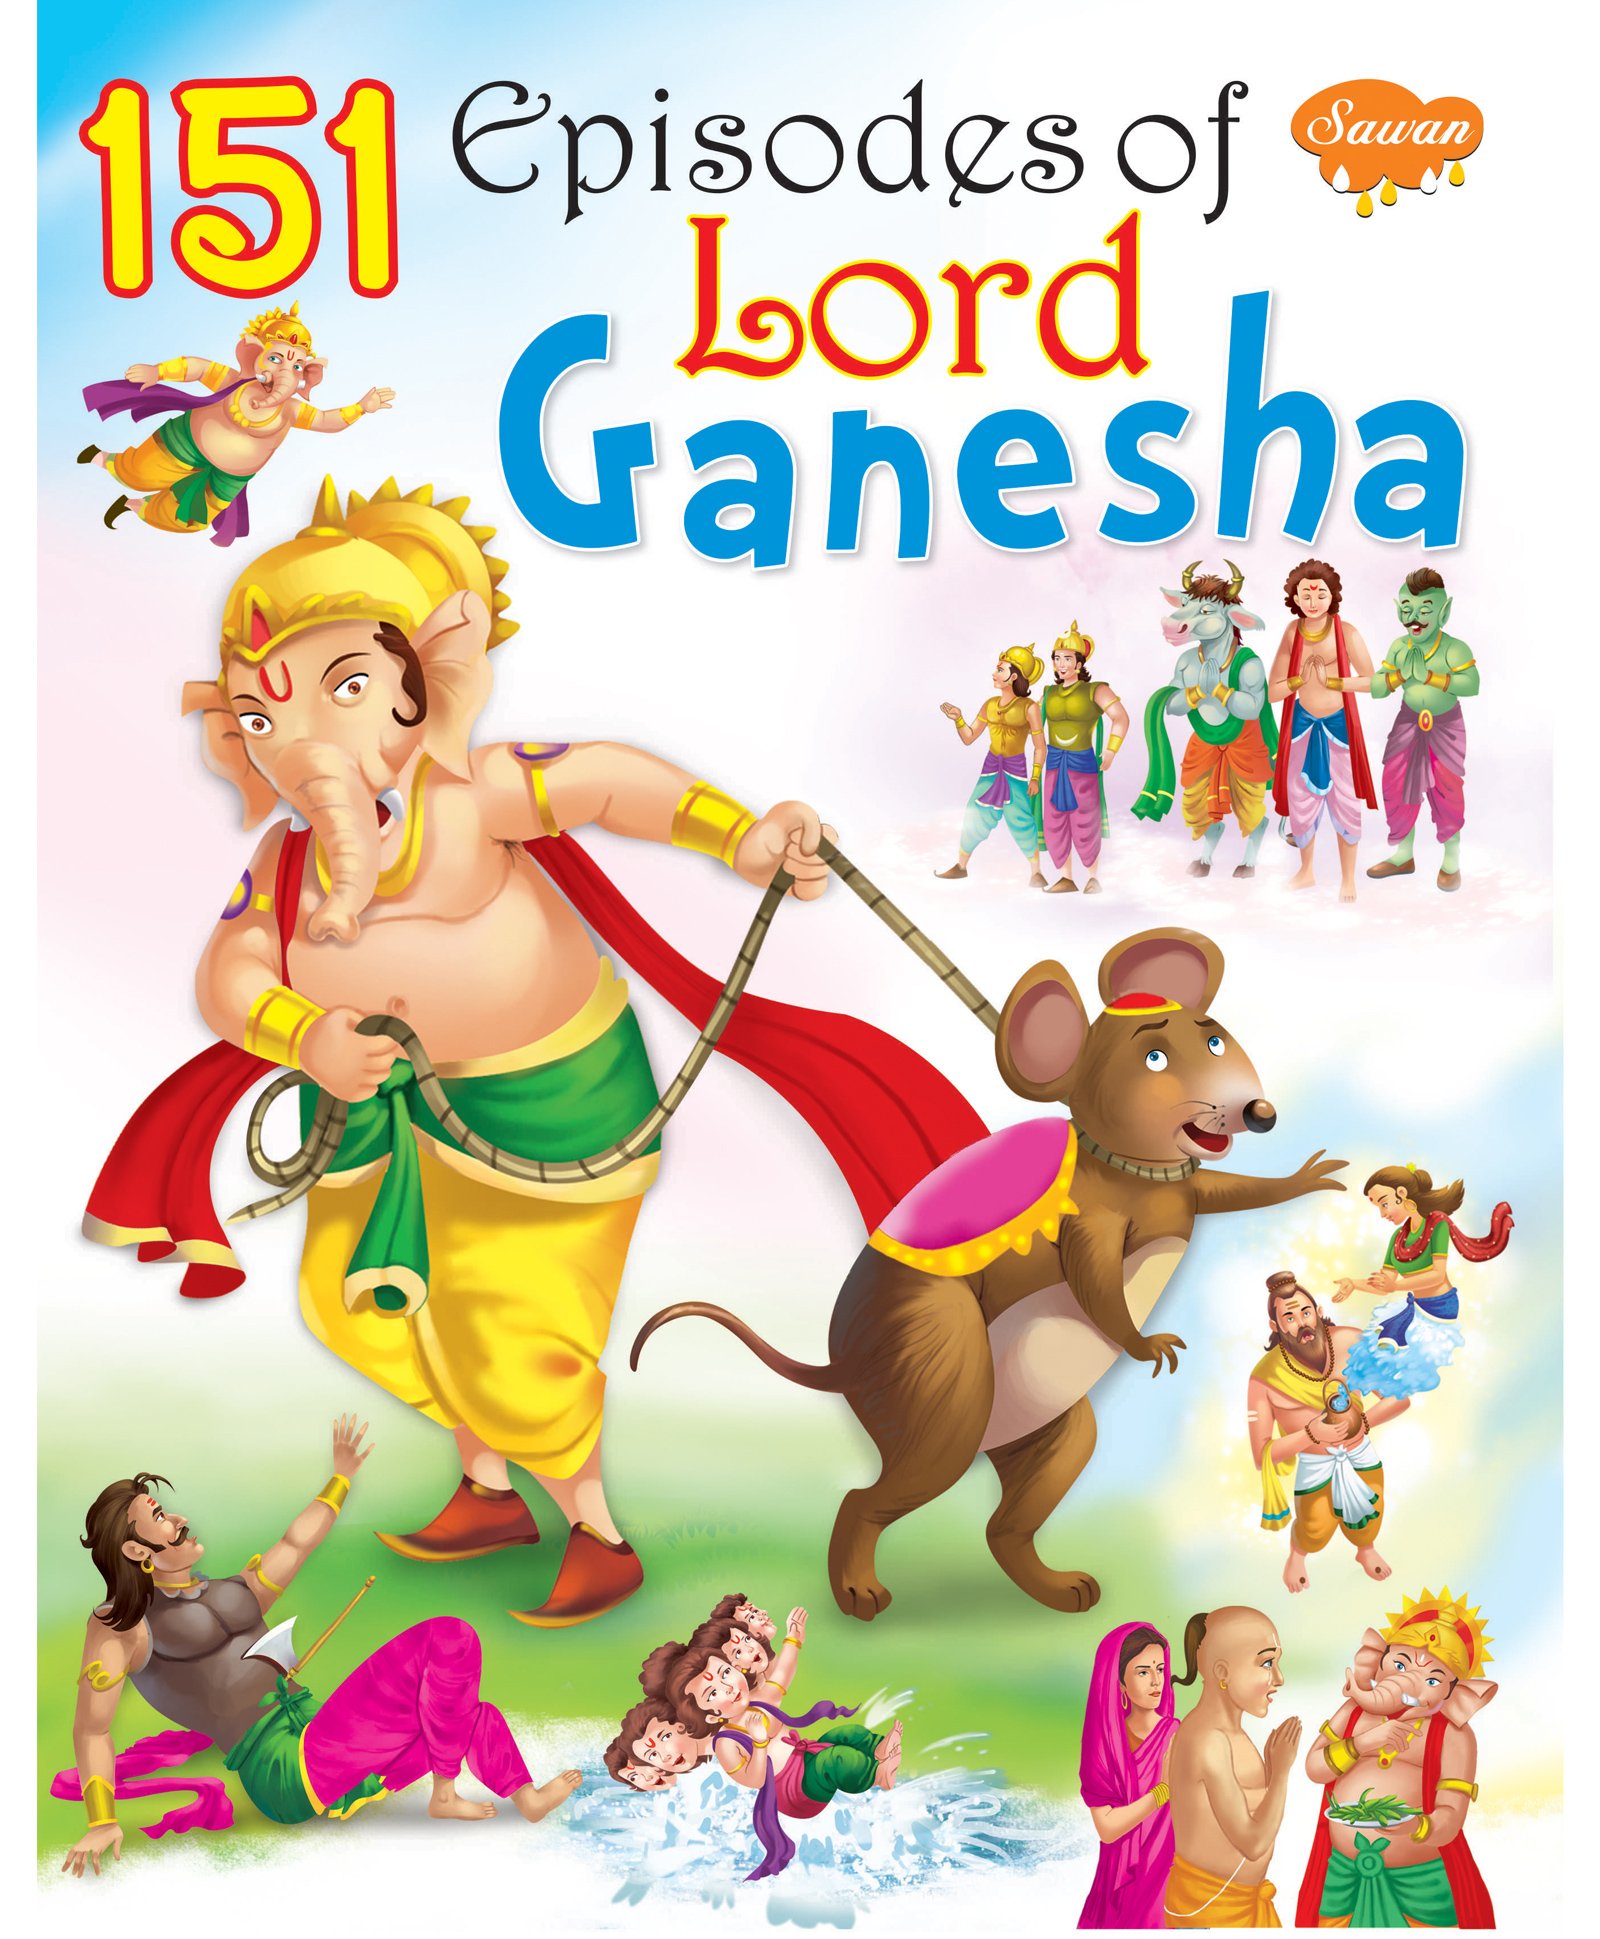 Sawan 151 Episodes of Lord Ganesha Story Book - English Online in India,  Buy at Best Price from  - 3322395